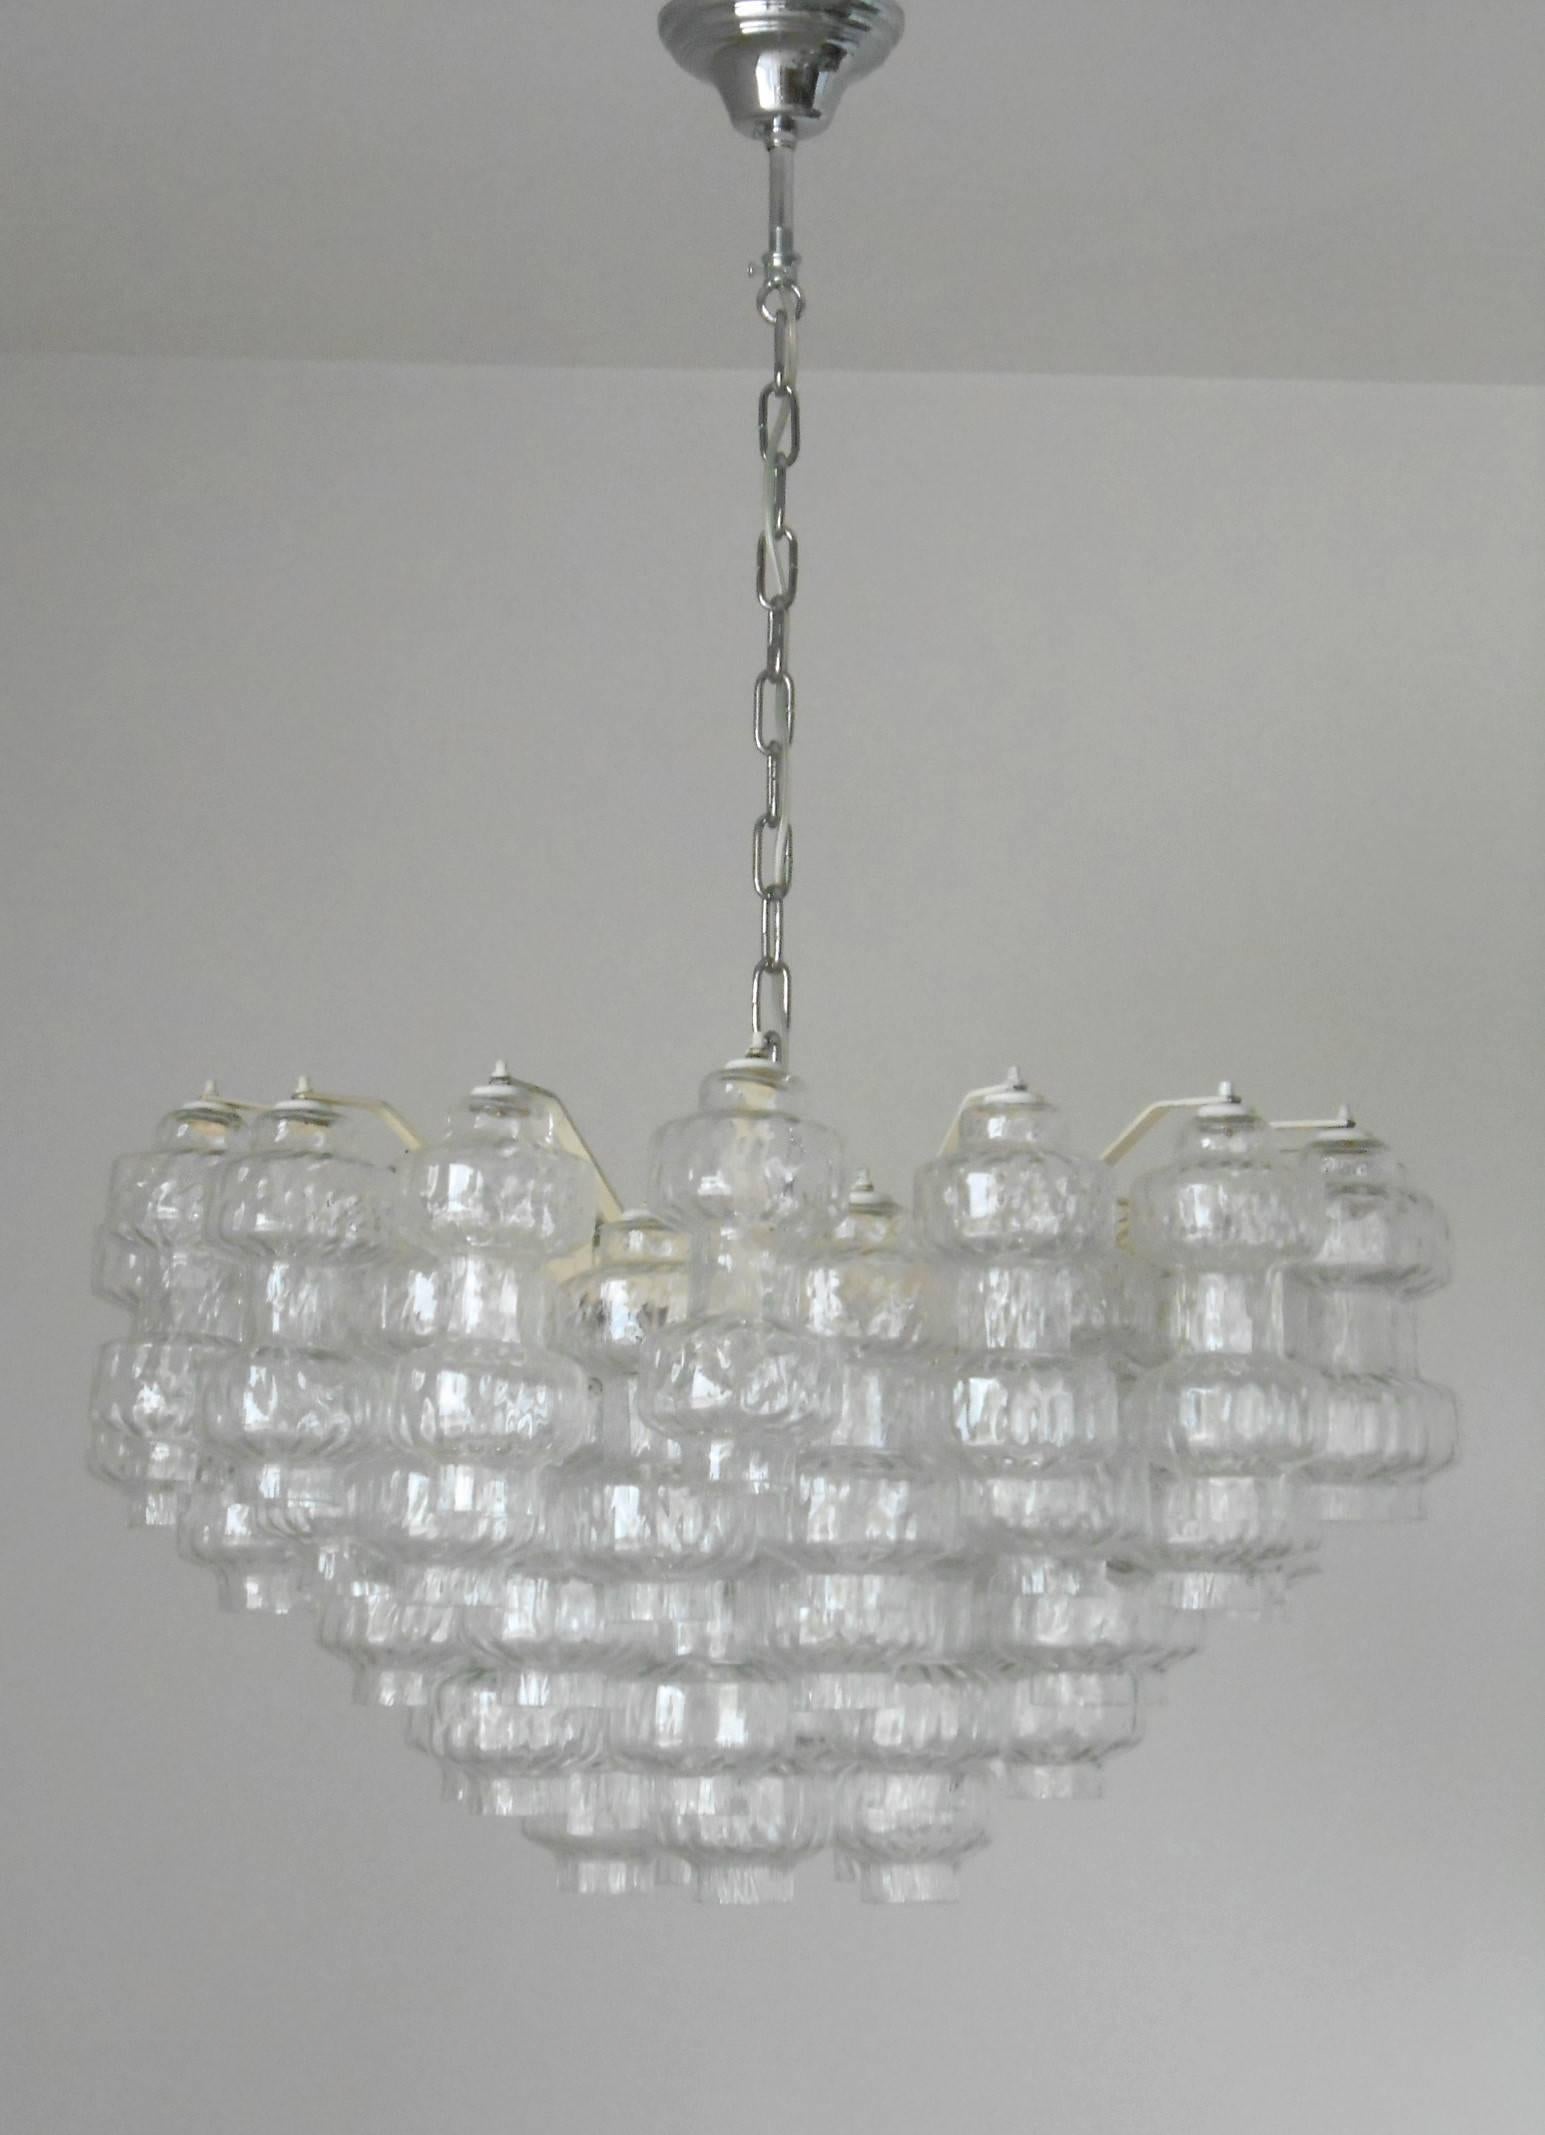 Clear Murano glass barbell shaped pieces mounted on metal frame.
Three-light sockets or wired for the US.
Measurements do not include chain and canopy.